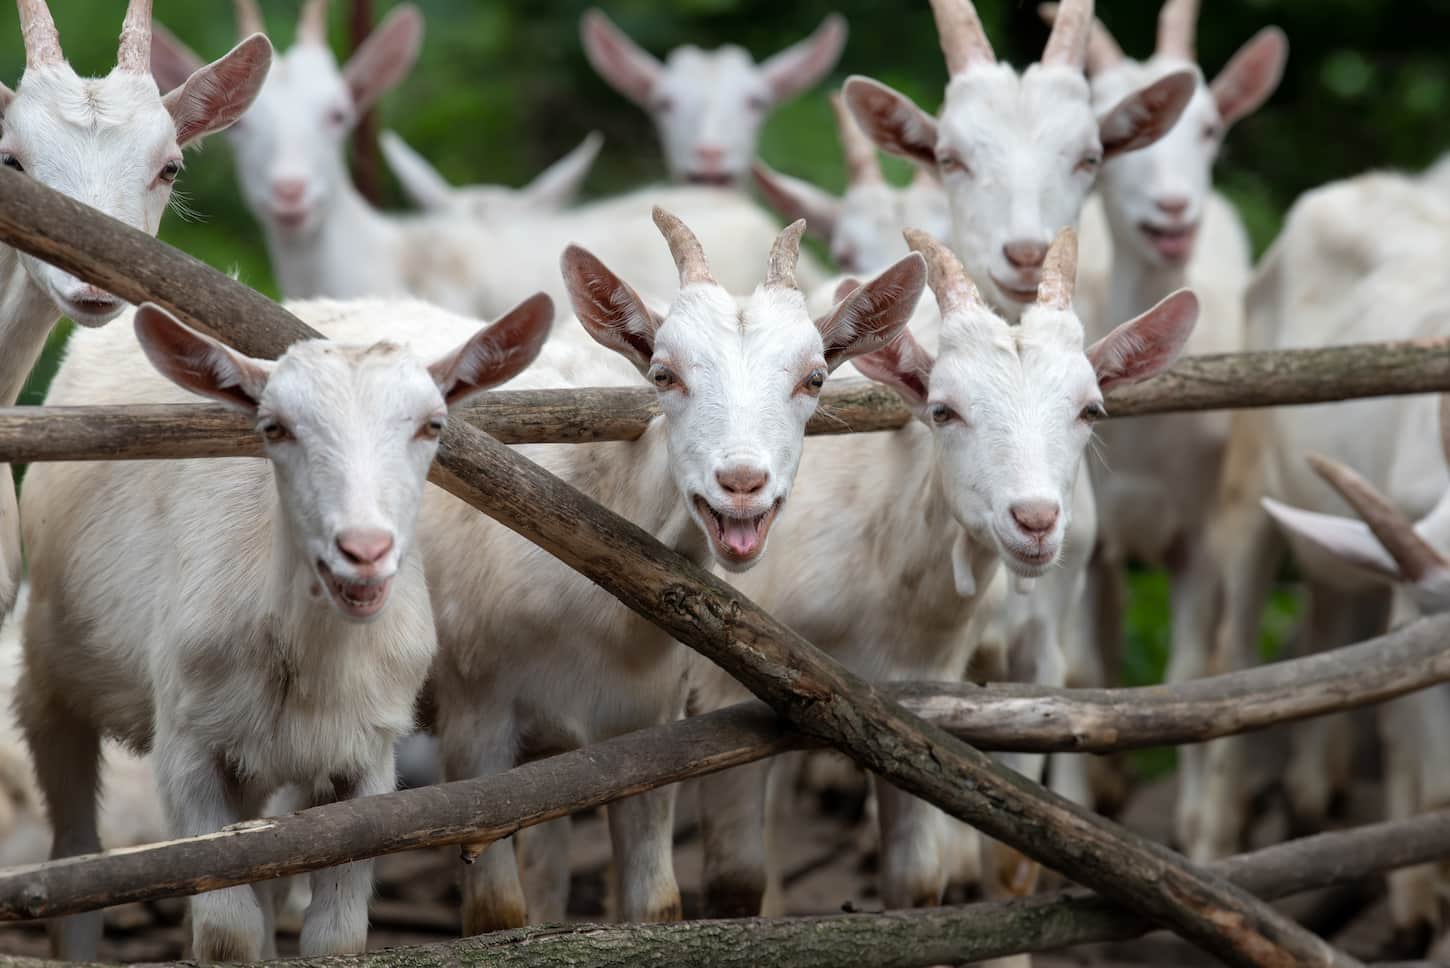 An image of white goats on the farm looking at the camera.